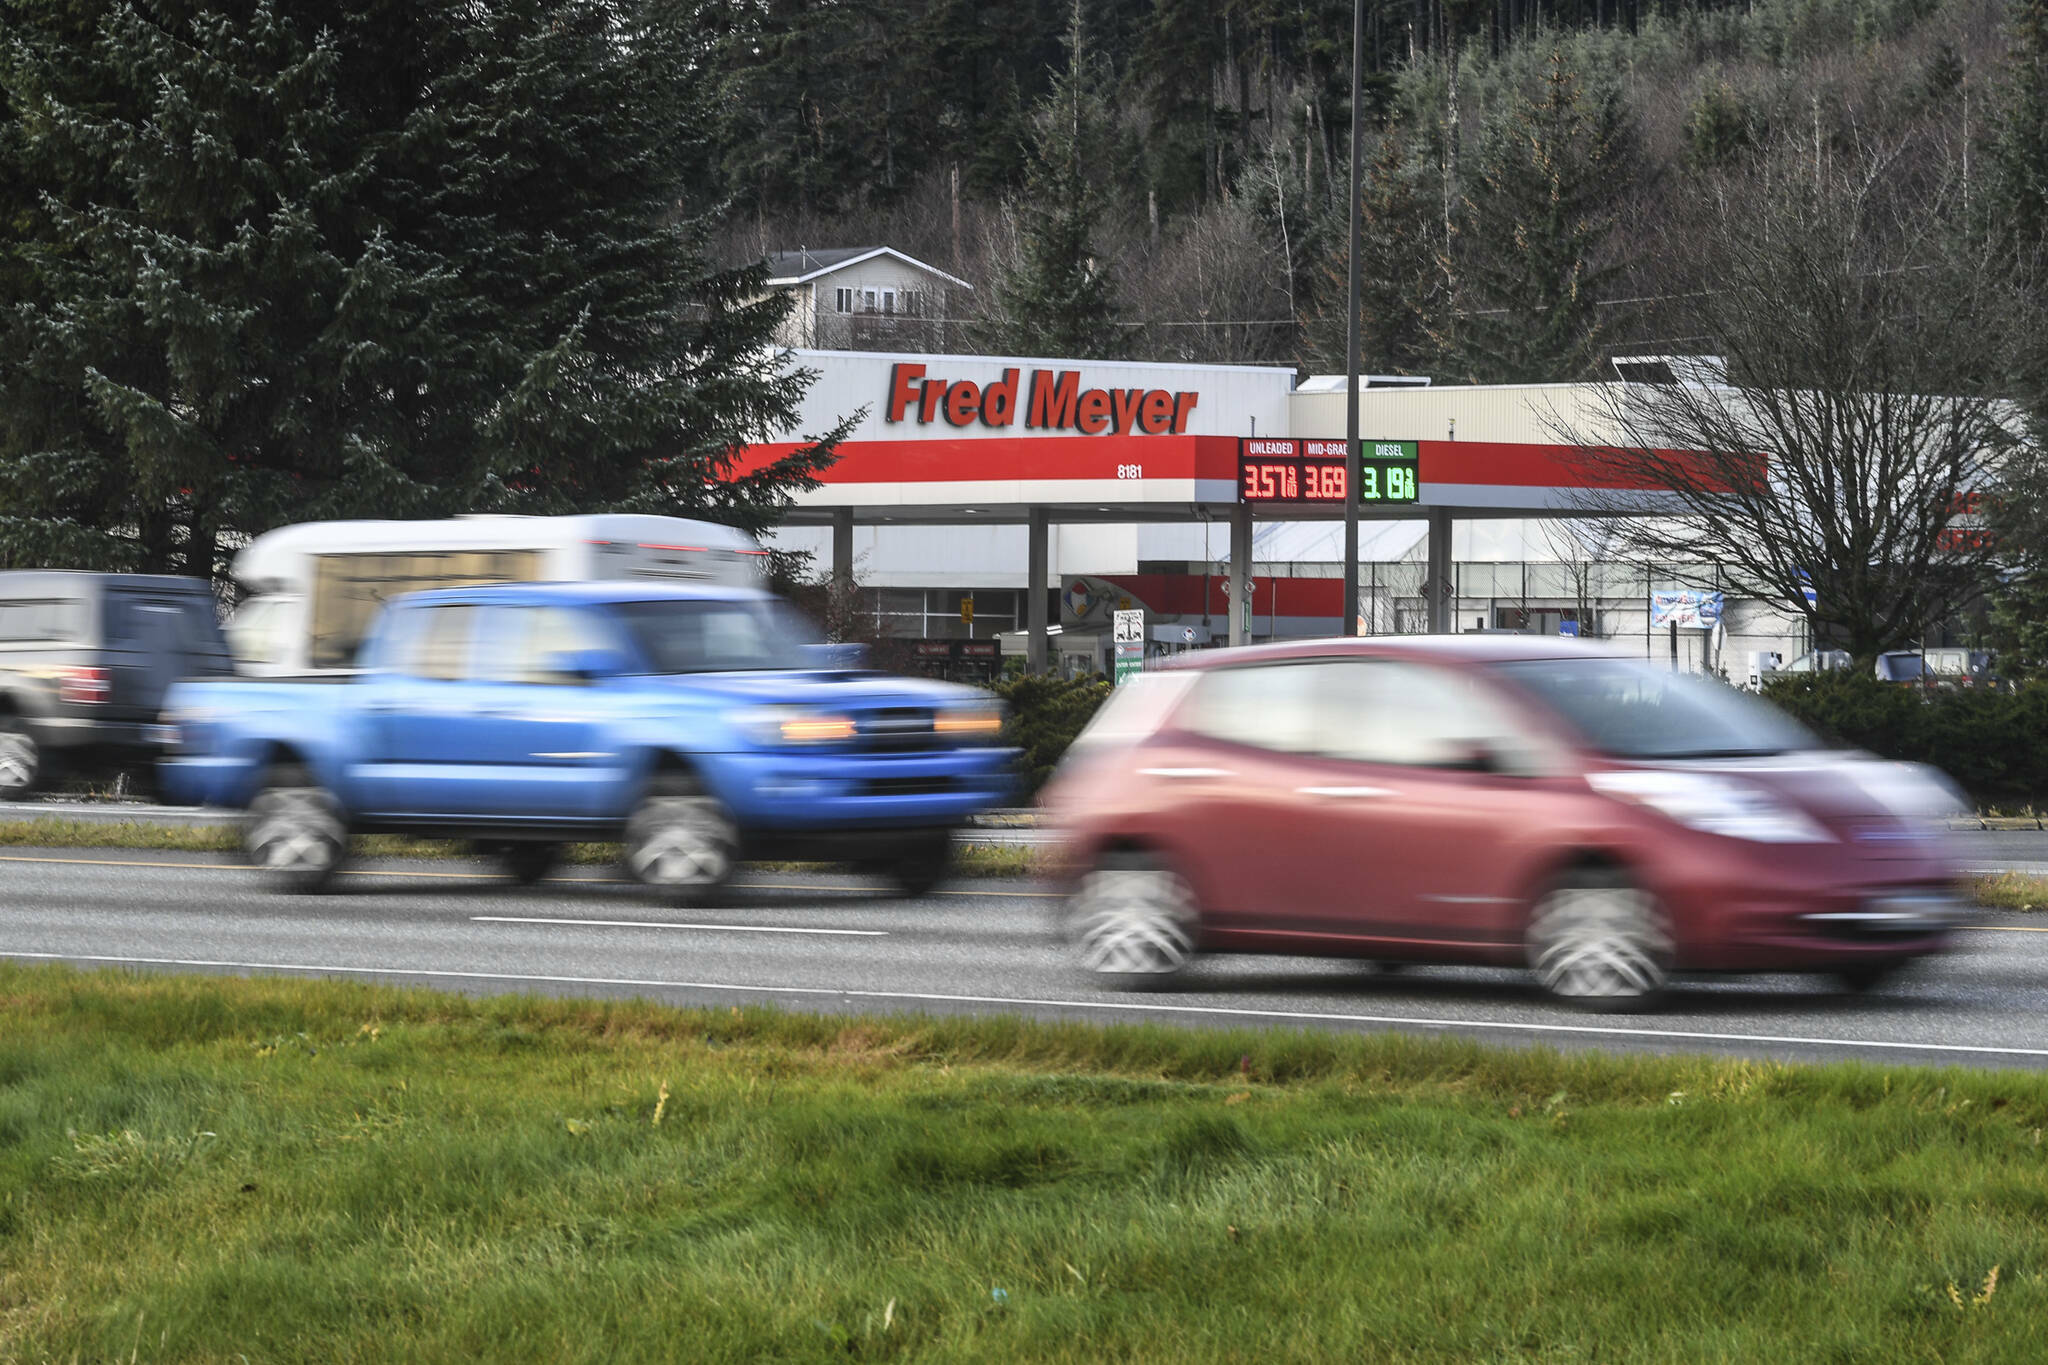 Traffic passes by Fred Meyer in Juneau in November 2019. The store’s parent company, Kroger Co., is planning to merge with Albertsons Companies Inc., the parent company of Safeway. The companies announced Friday 14 of 35 Carrs Safeway stores in Alaska will be sold as part of the merger, but it is not known if Juneau’s Safeway is among them. (Michael Penn / Juneau Empire File)